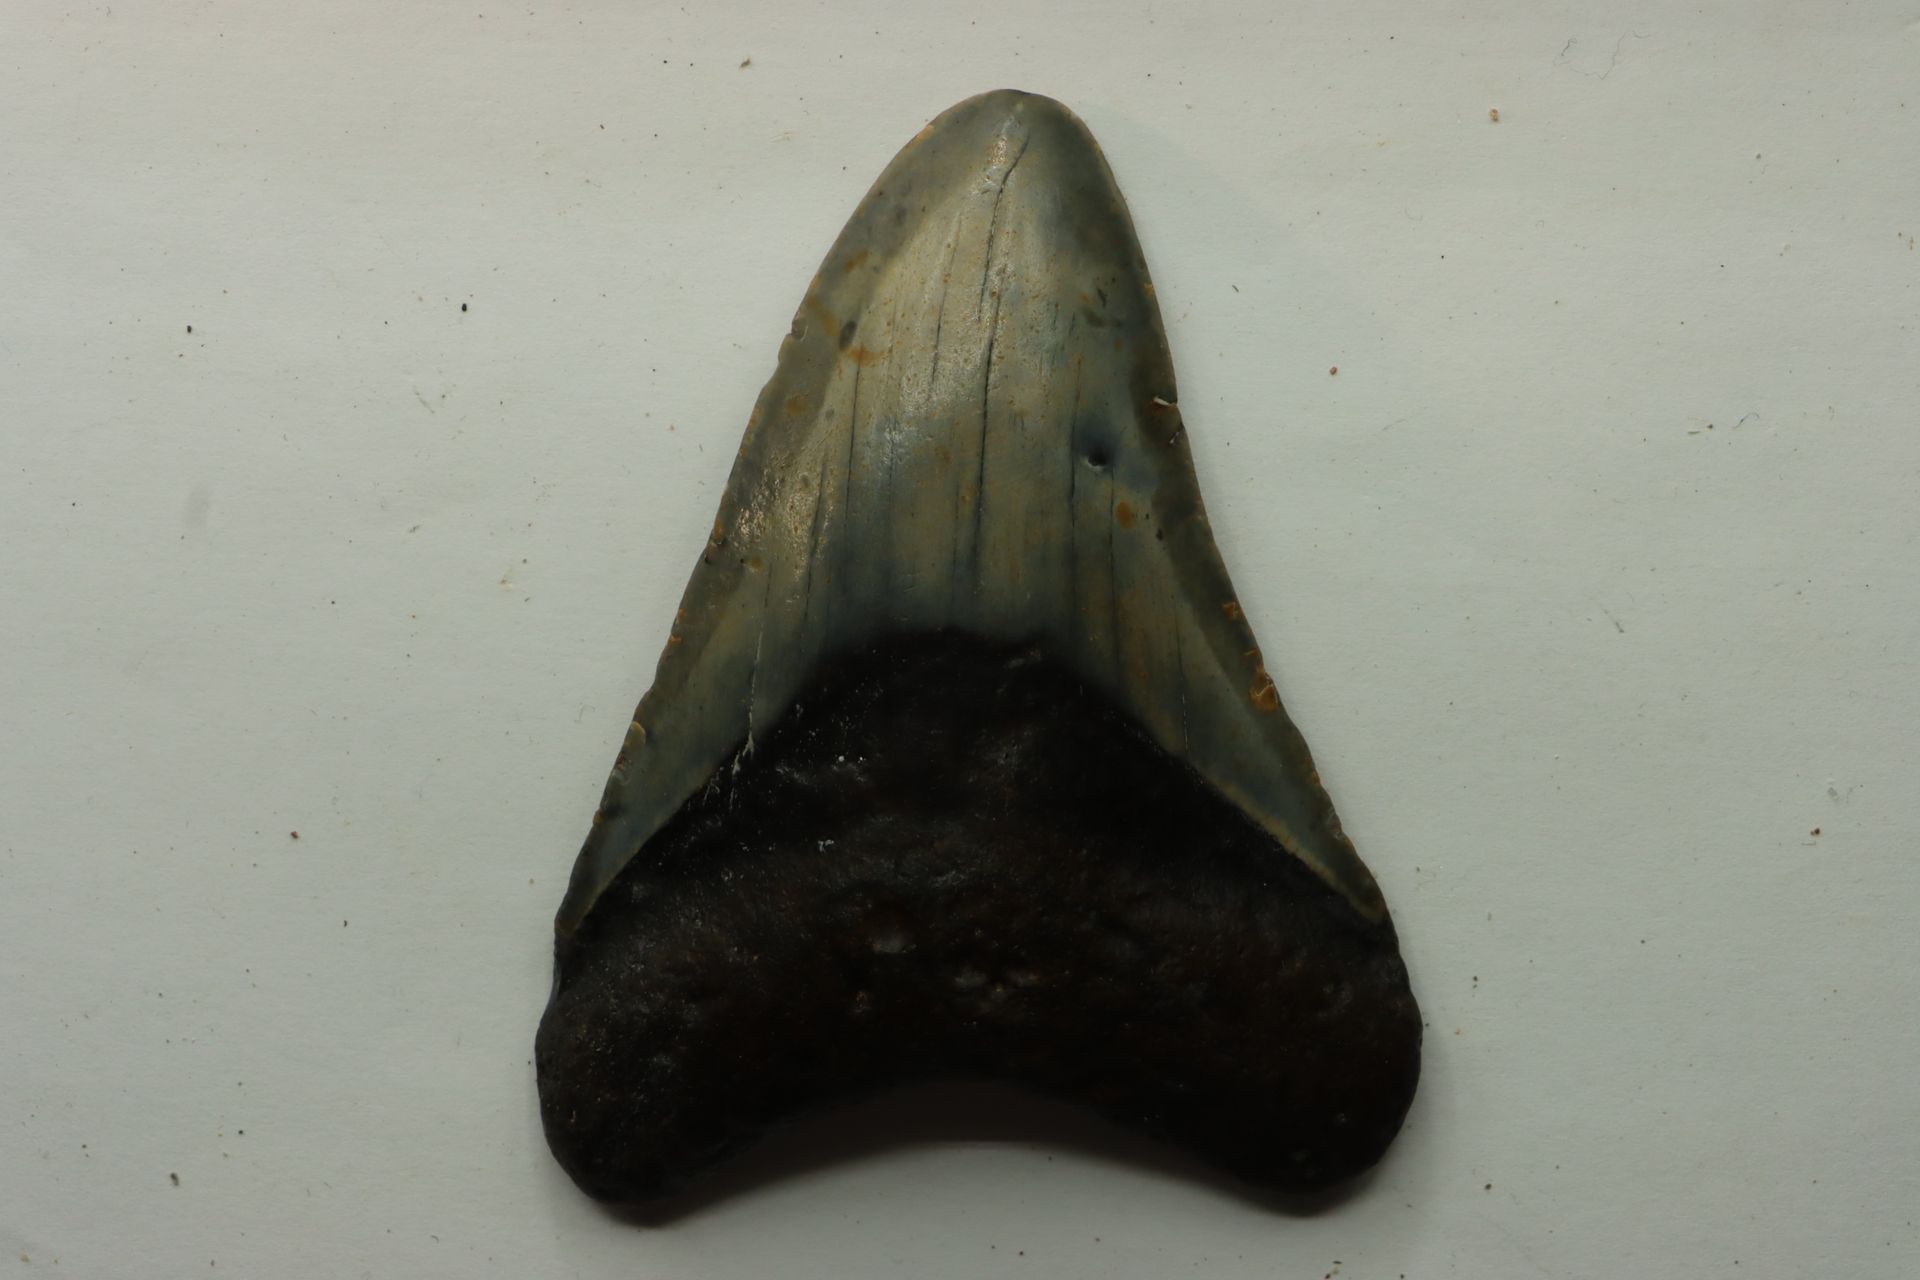 Dent de requin « carcharodon megalodon » – miocène des USA tooth of the mythical&hellip;